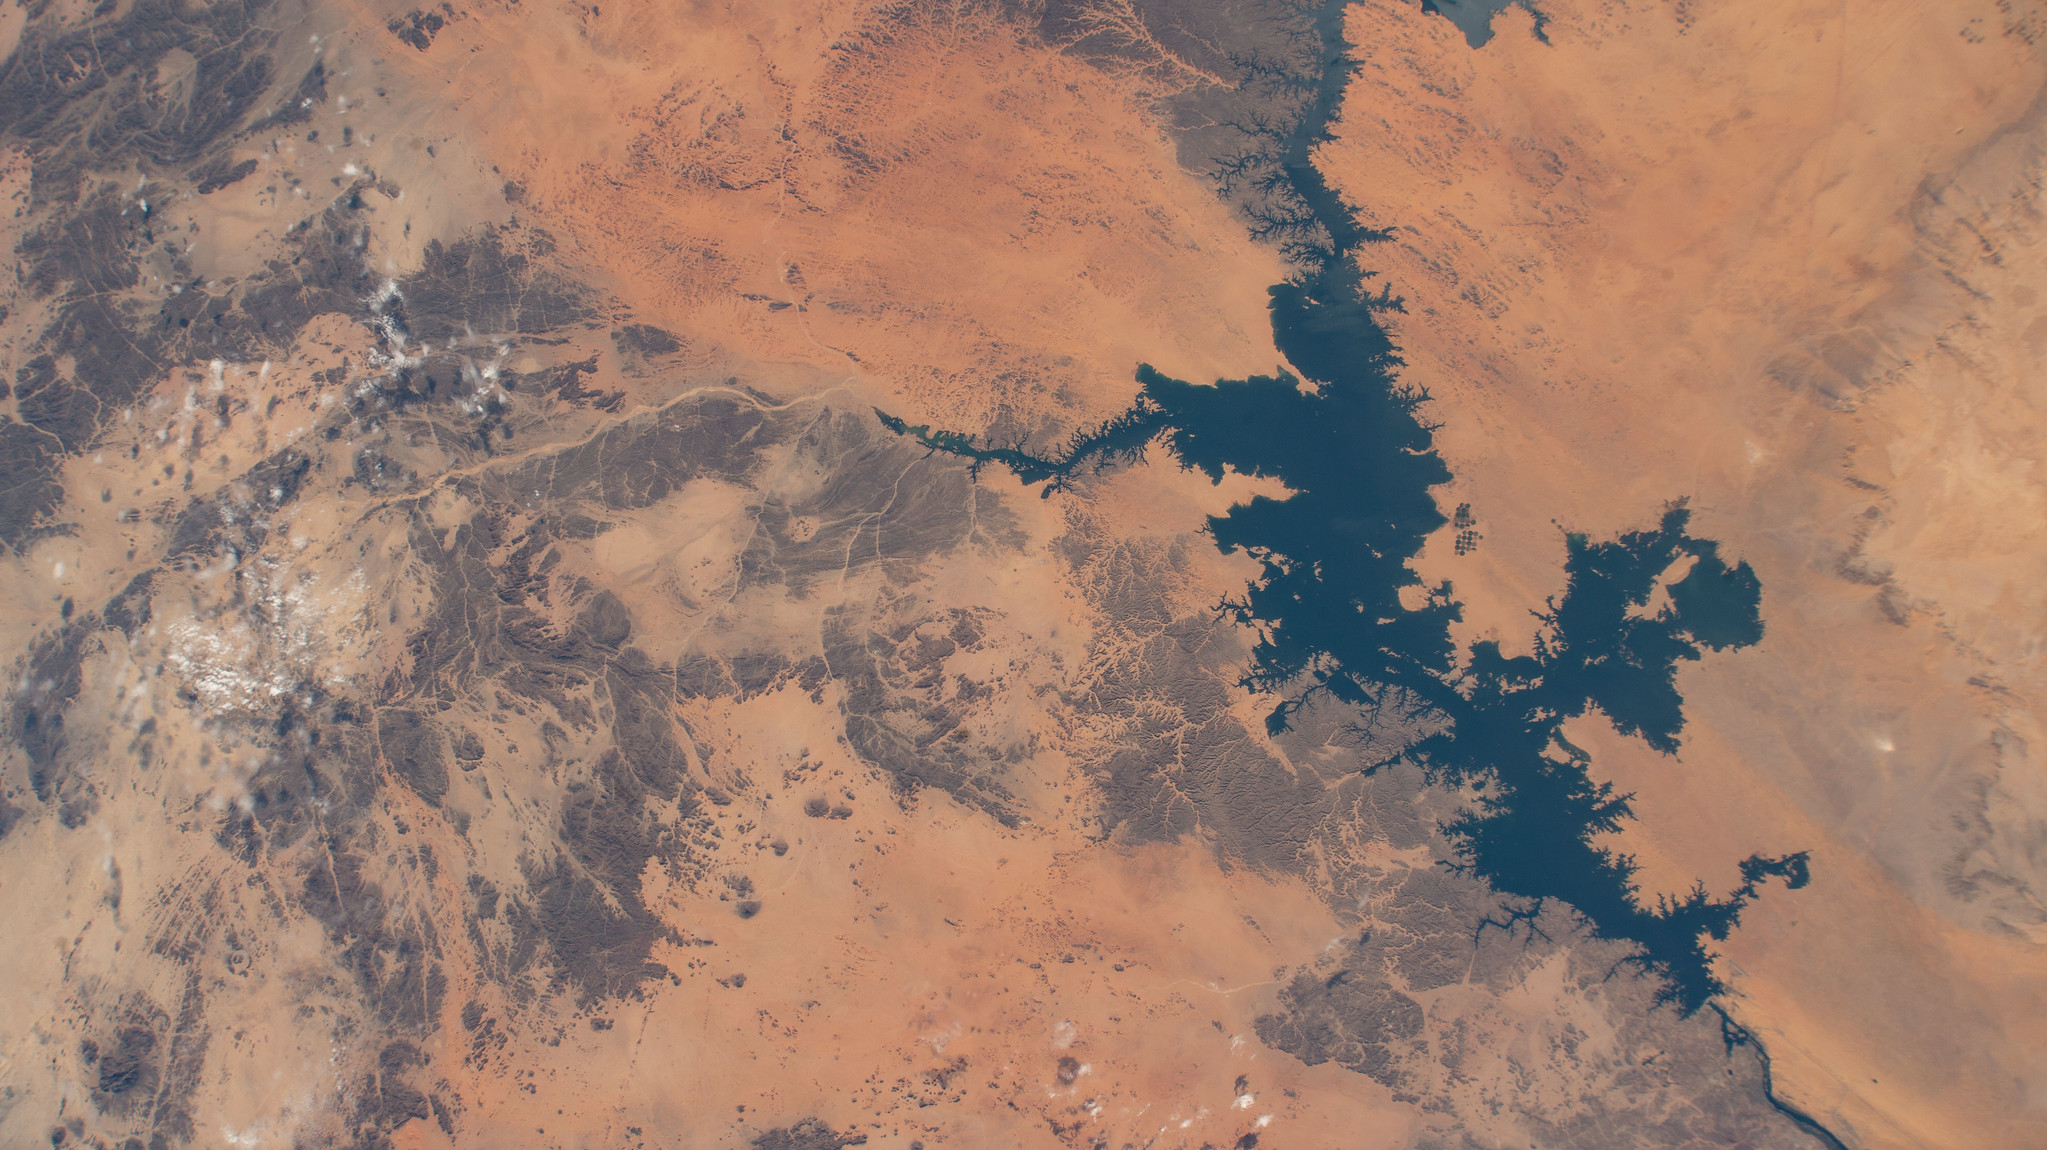 image of Lake Nasser, one of the largest man-made lakes in the world, in southern Egypt as seen from the International Space Station as it orbits 262 miles above.